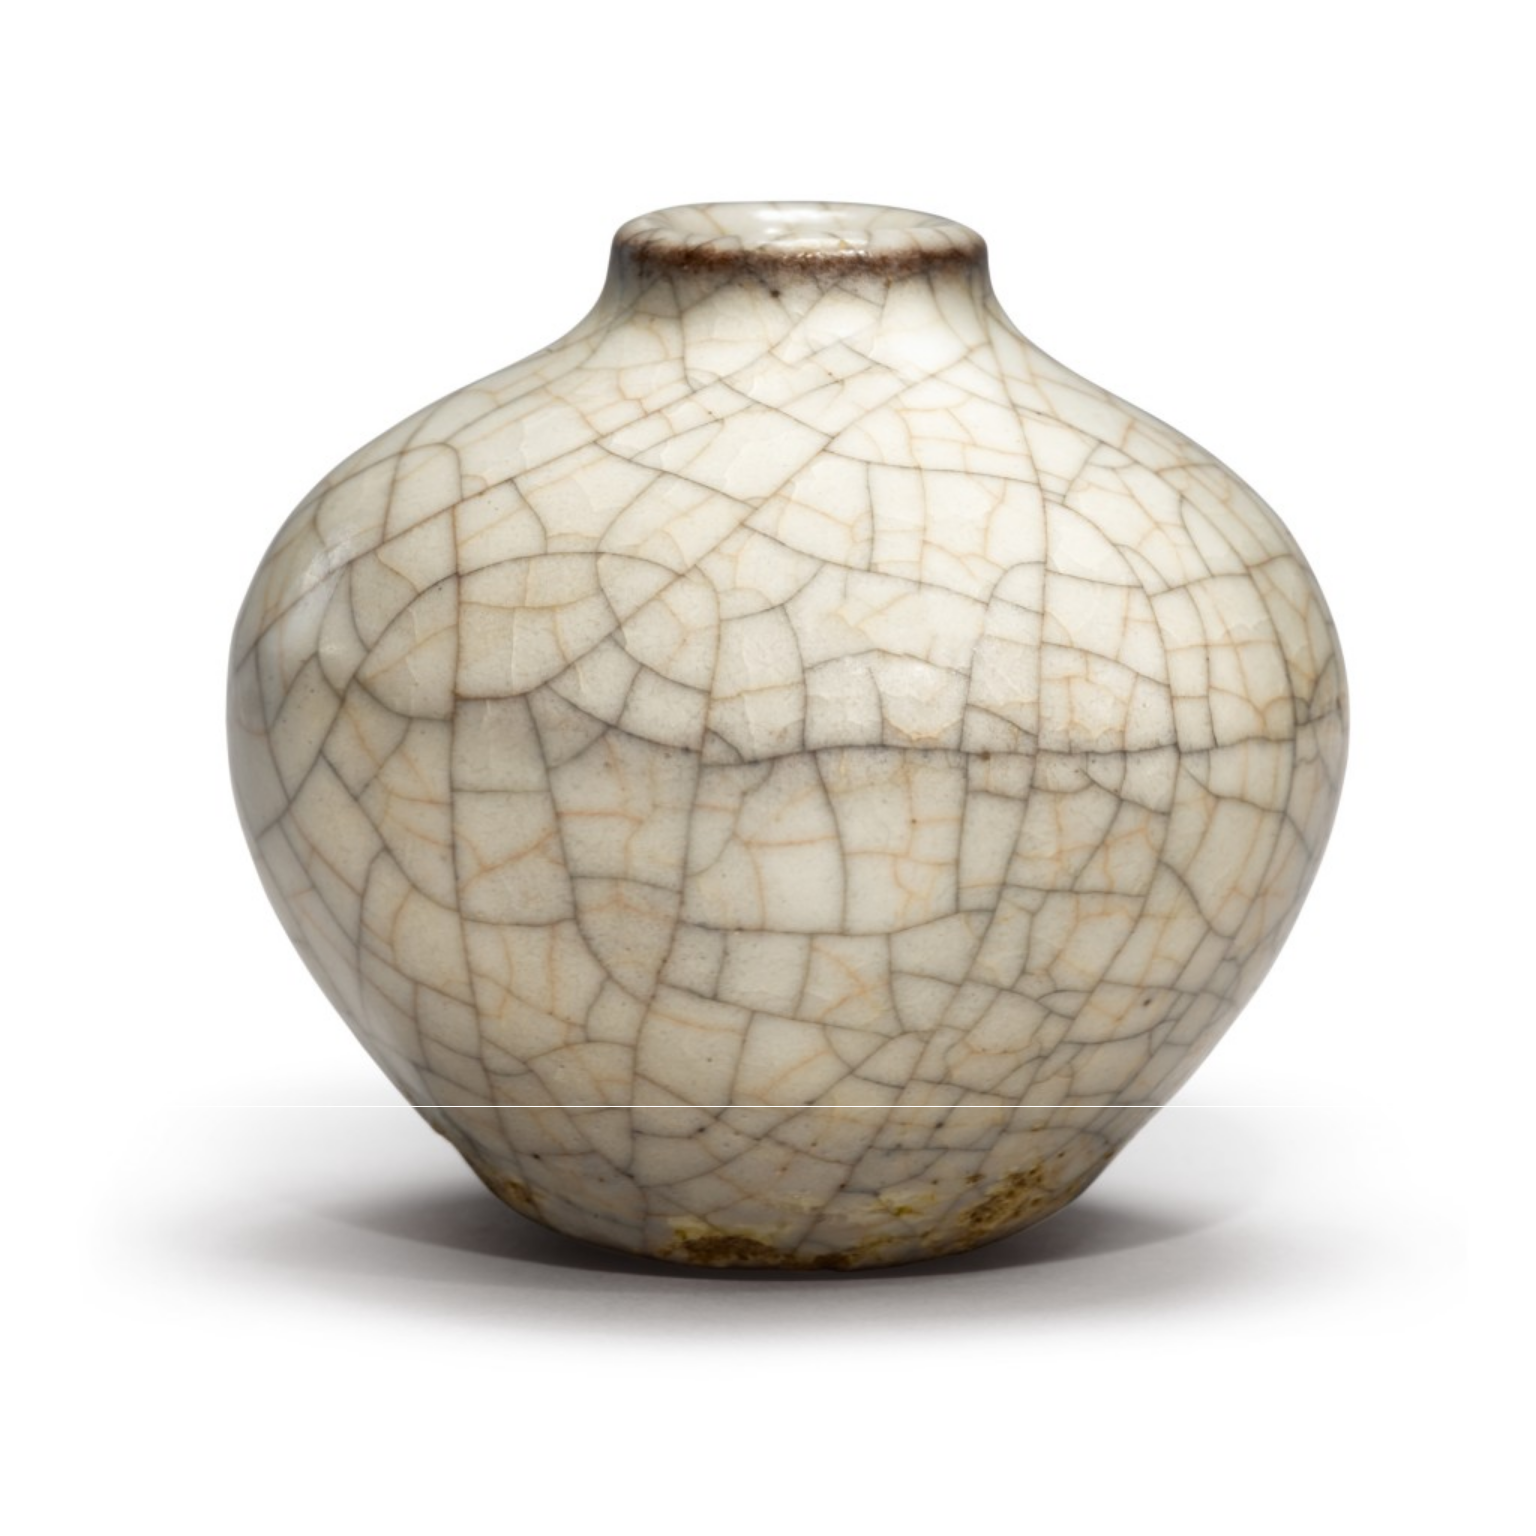 A SMALL GUAN-TYPE OVOID JAR, YUAN - EARLY MING DYNASTY